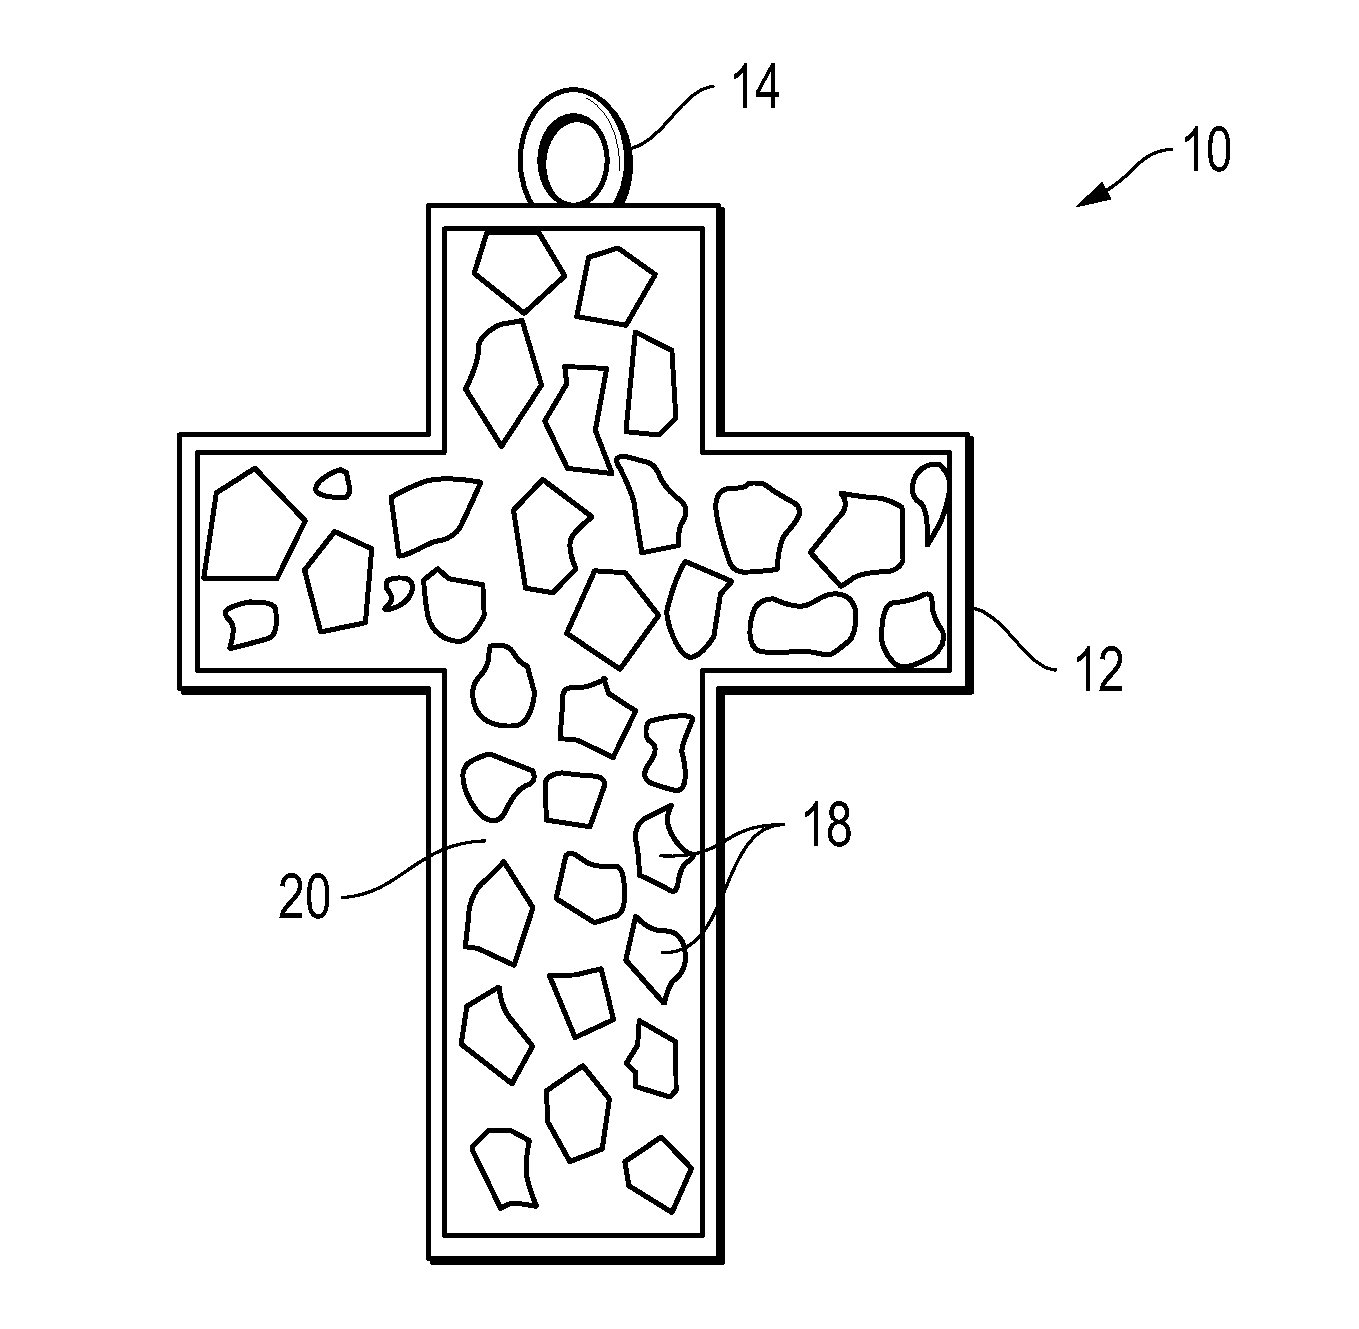 Deciduous Teeth Matrix Jewelry and Method of Manufacture